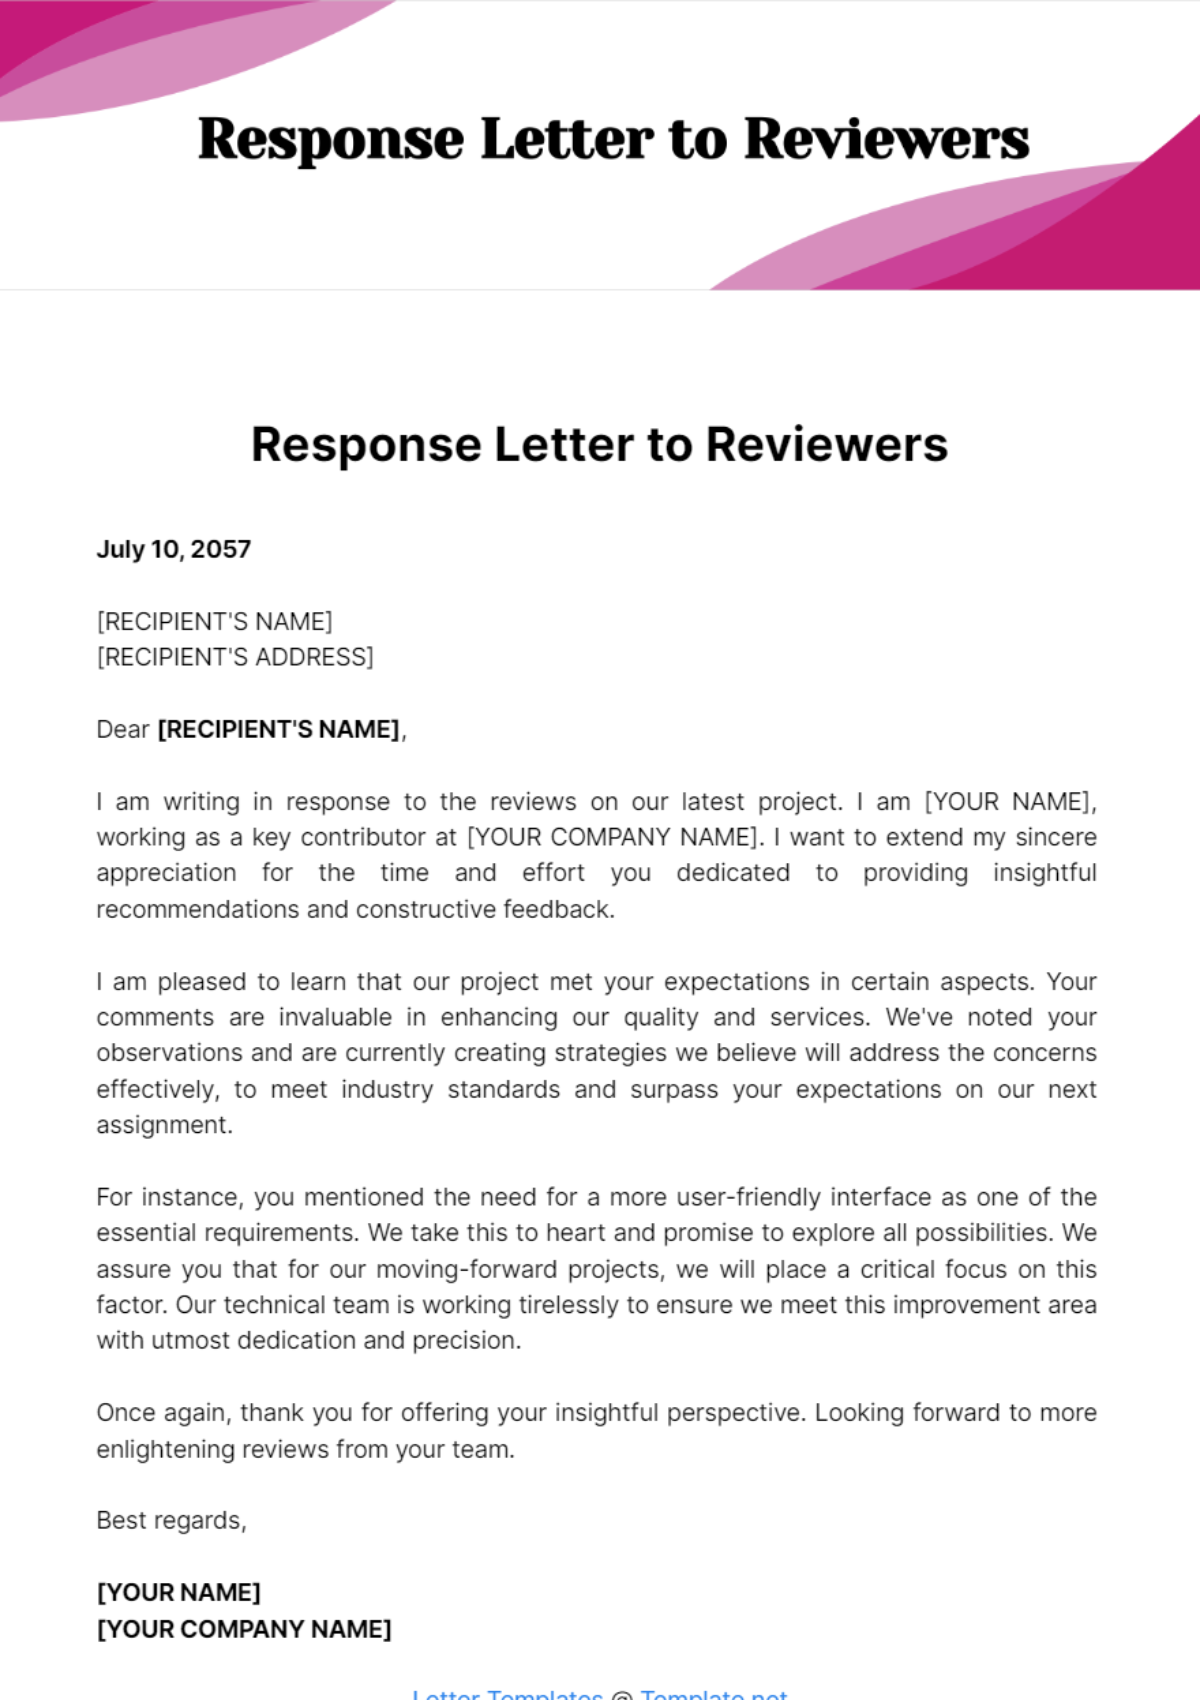 Free Response Letter to Reviewers Template